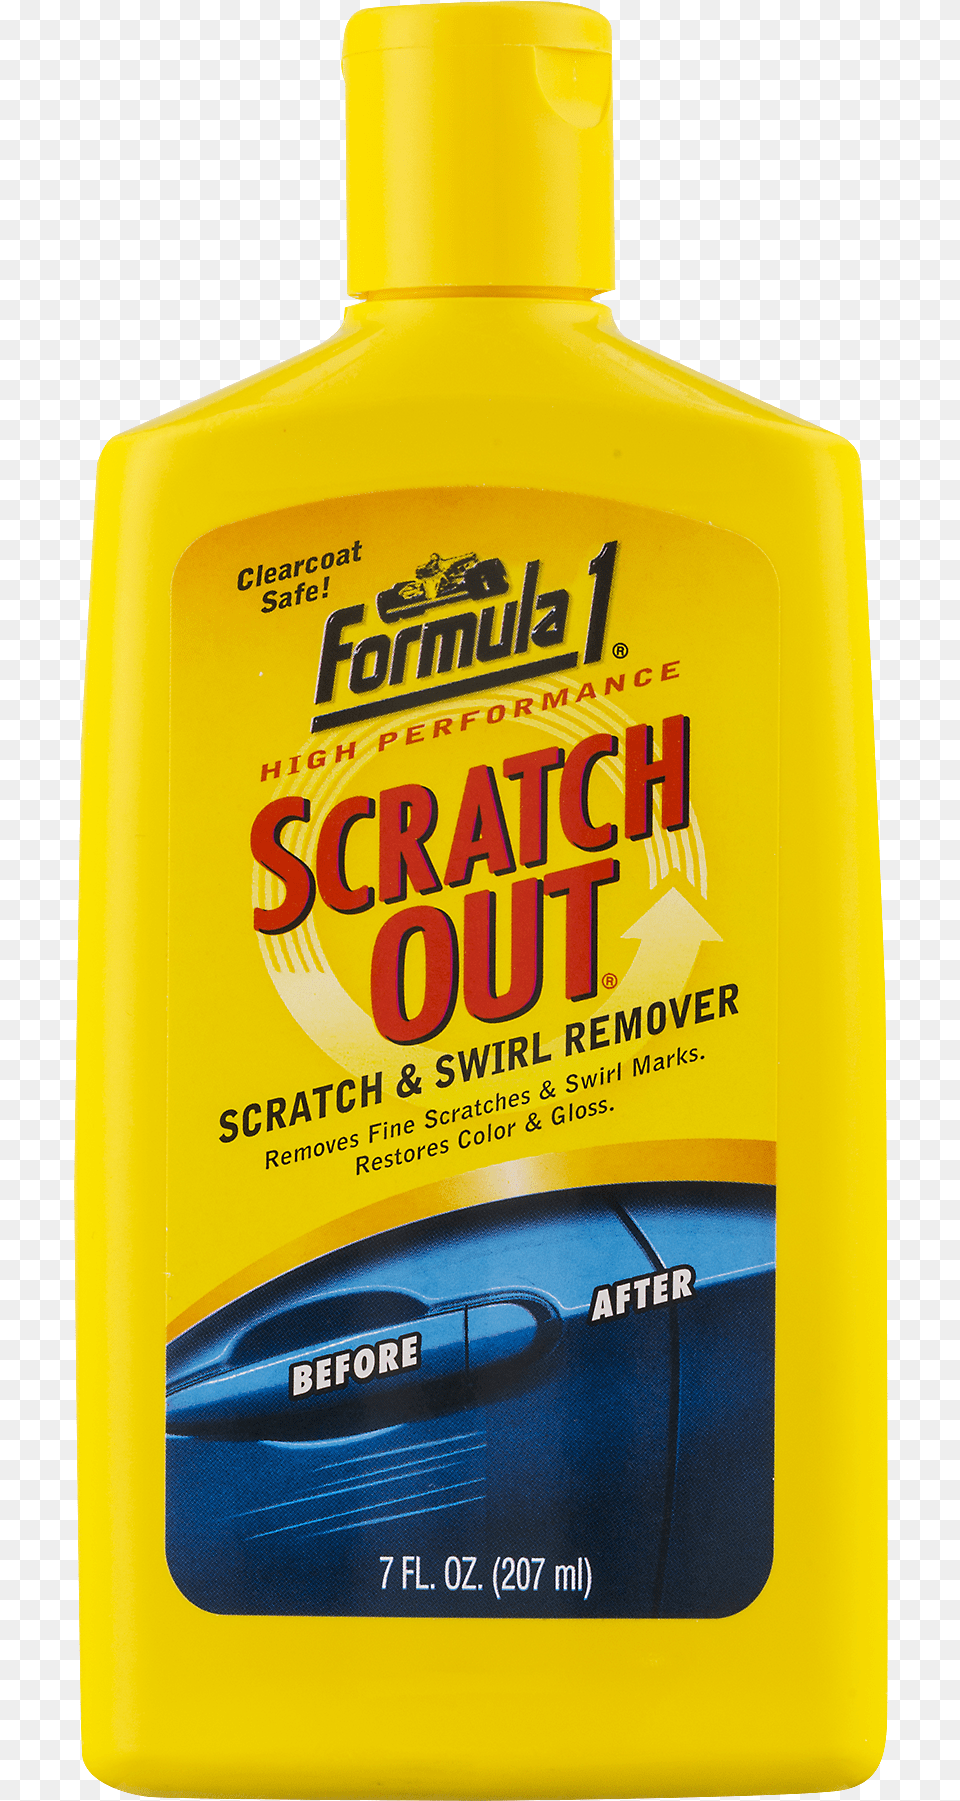 Formula 1 Scratch Out Scratch And Swirl Remover, Bottle, Food, Mustard, Cosmetics Png